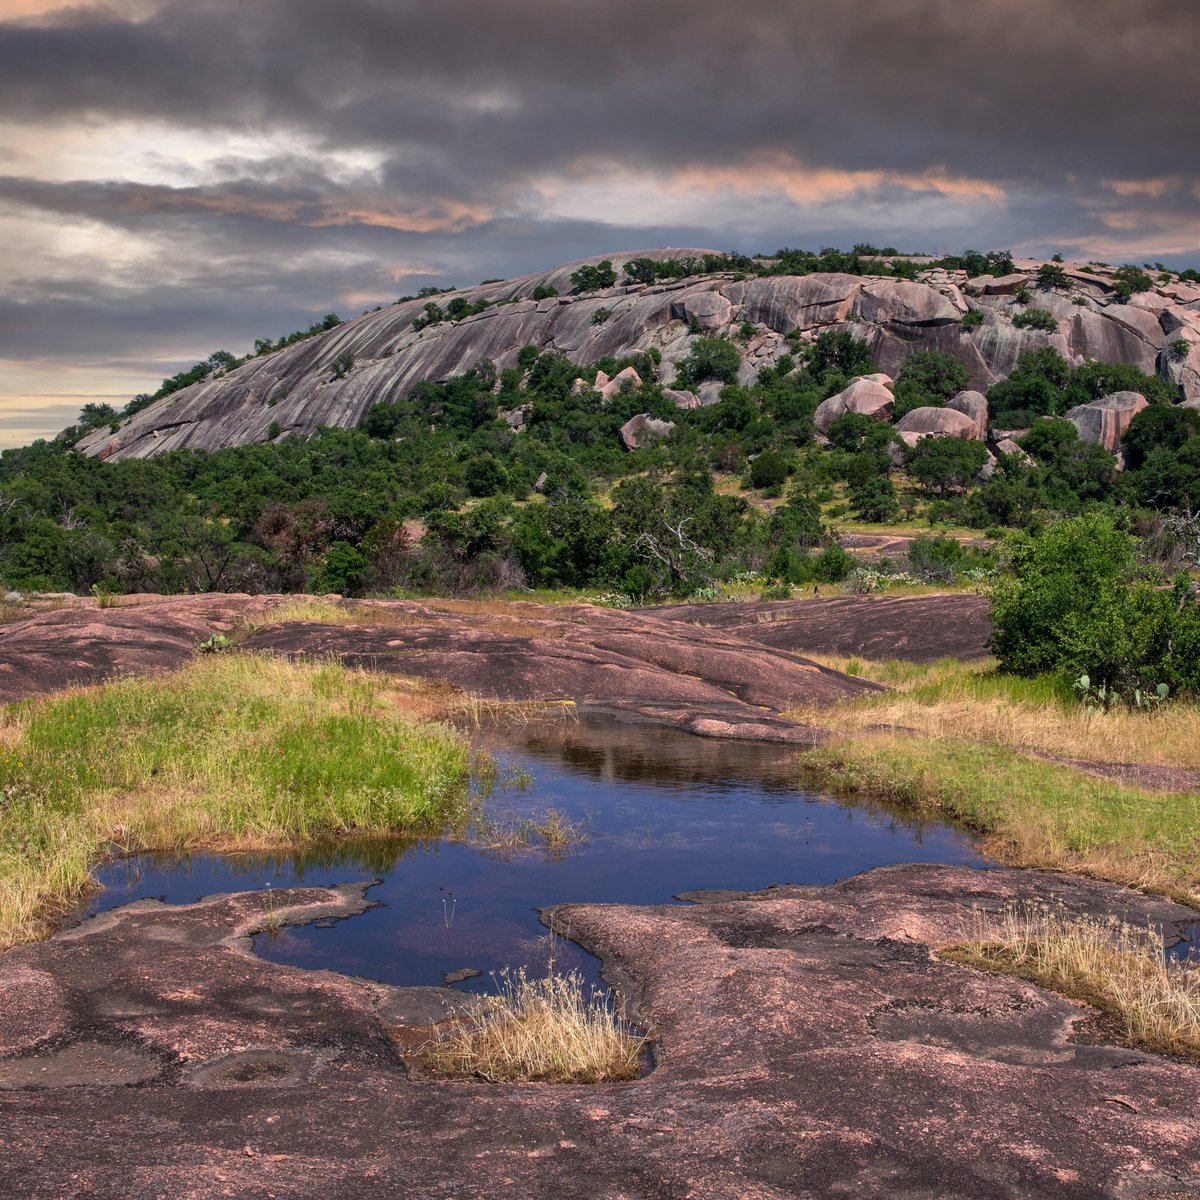 Raise your hand if you've made it to the top of @GoEnchantedRock  👋🏼

The massive pink granite dome with amazing #HillCountry views just celebrated 45 years with #TexasStateParks 🎂

#EnchantedRock
@nature_tx